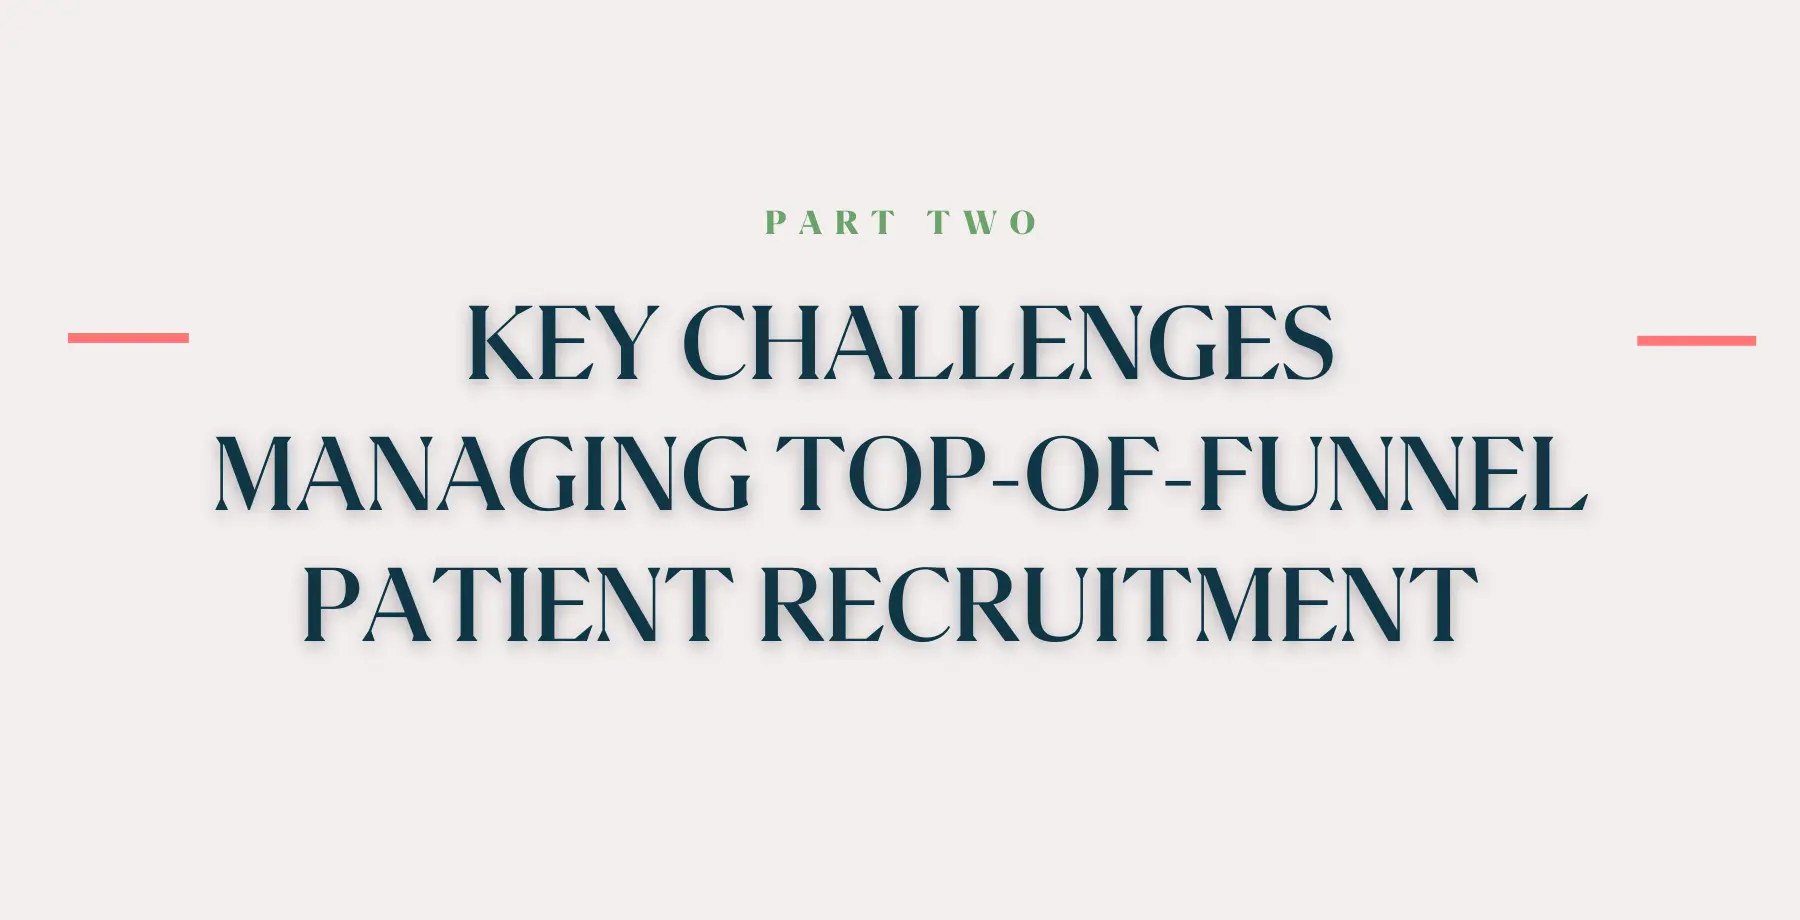 Key Challenges Managing Top-of-Funnel Patient Recruitment